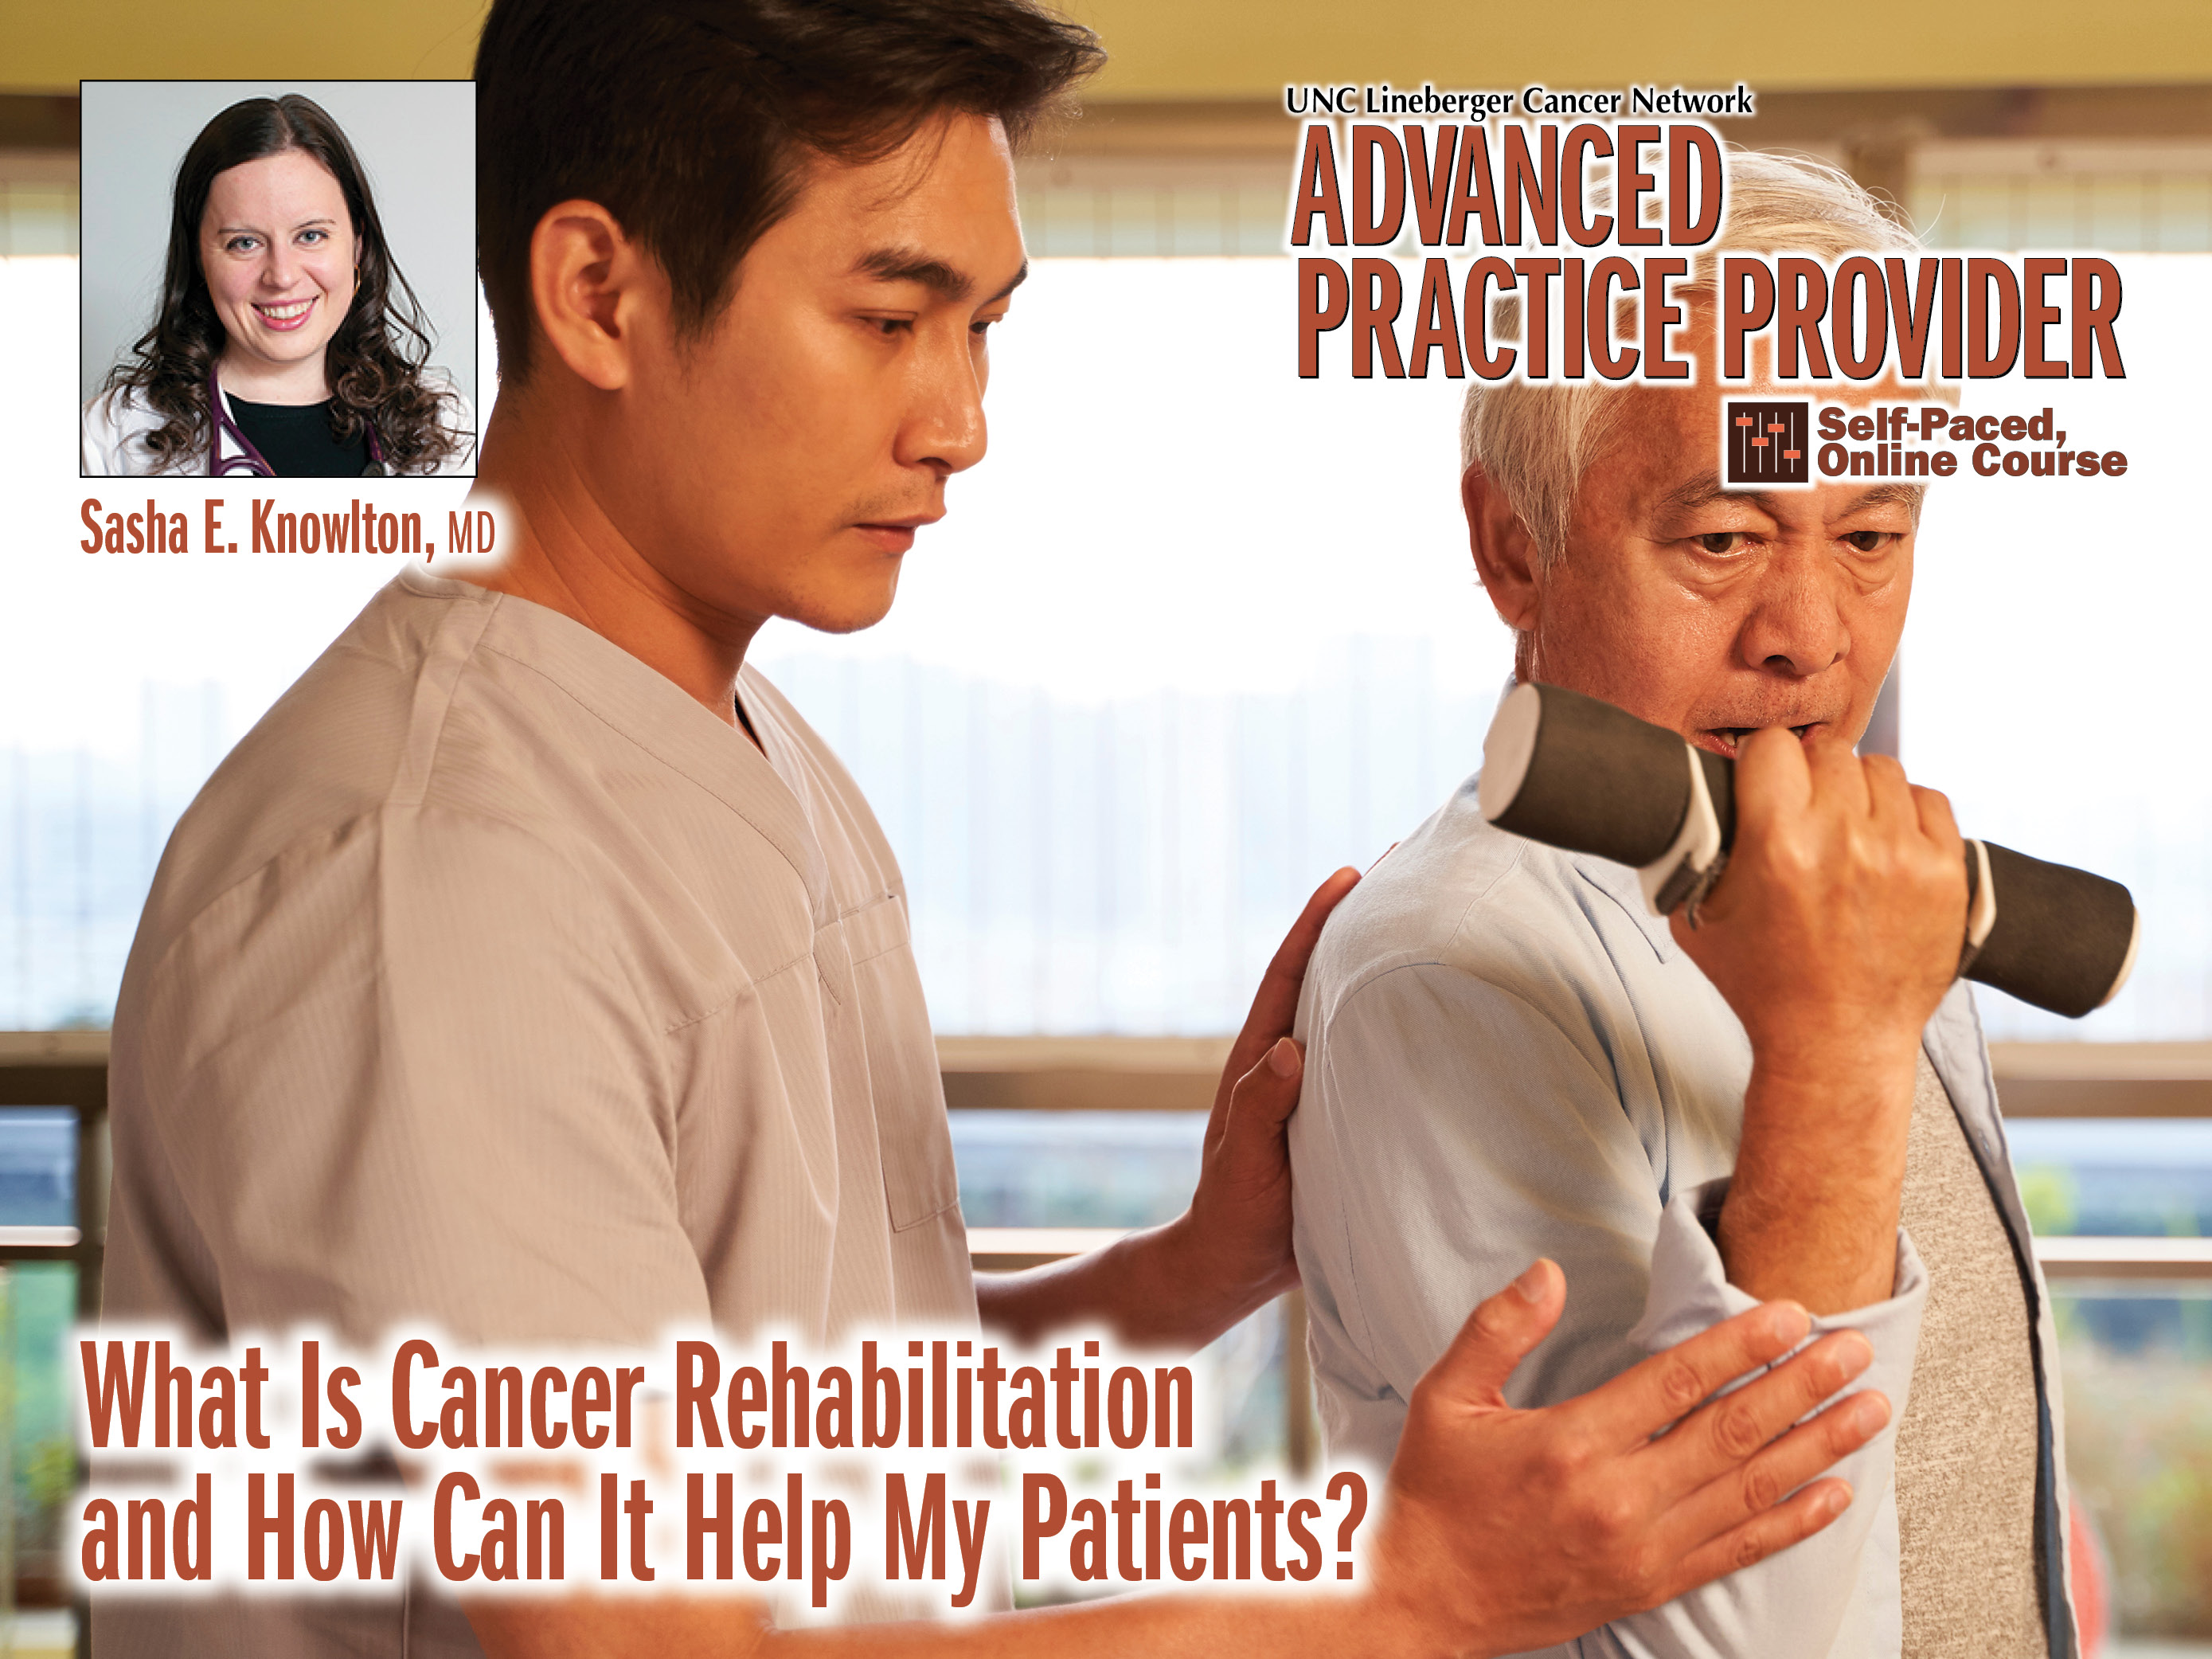 What is Cancer Rehabilitation and How Can It Help My Patients